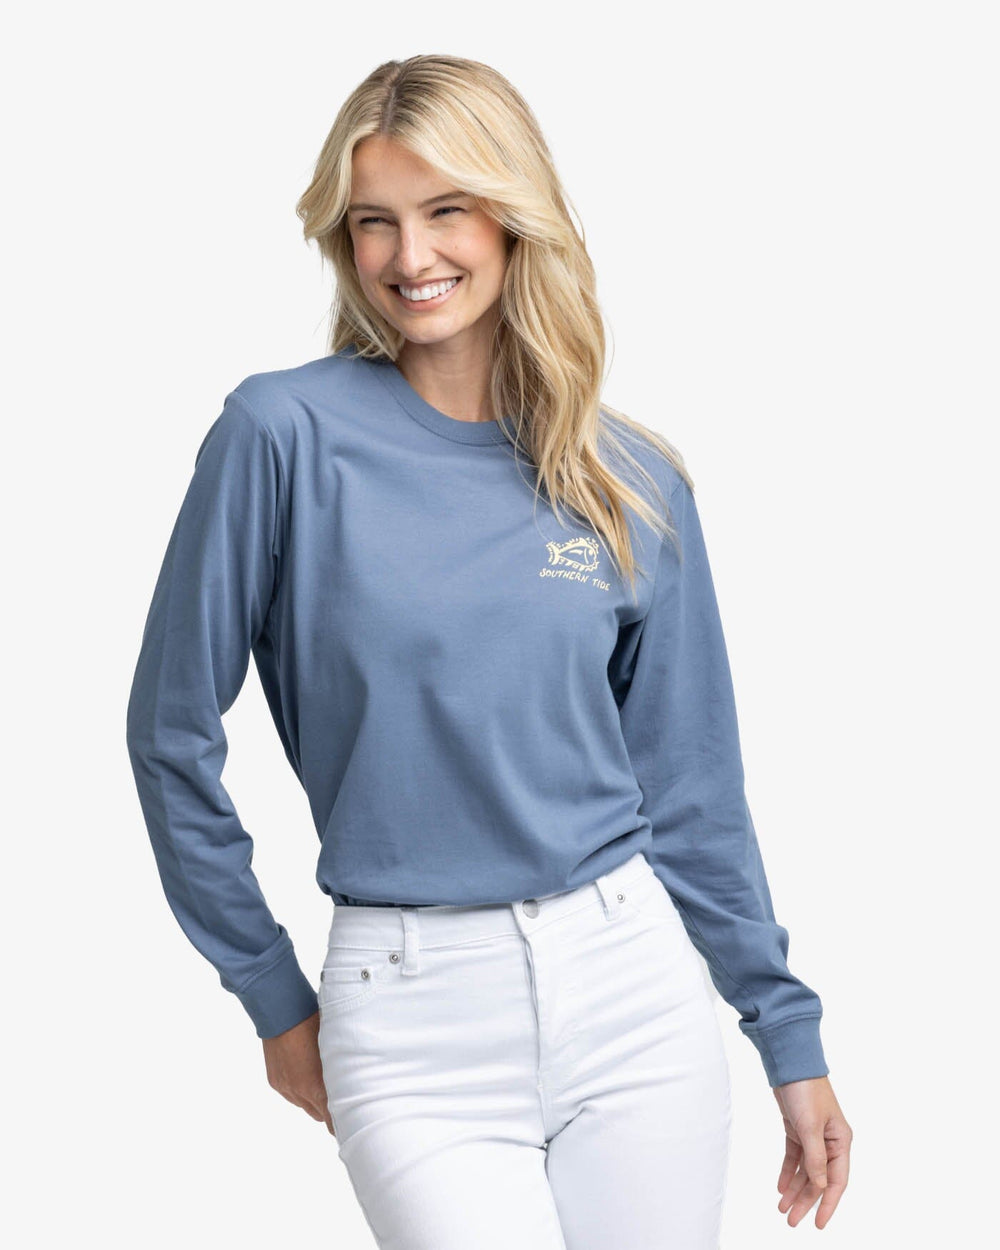 The front view of the Southern Tide Sunset Sippin Long Sleeve T-shirt by Southern Tide - Blue Haze